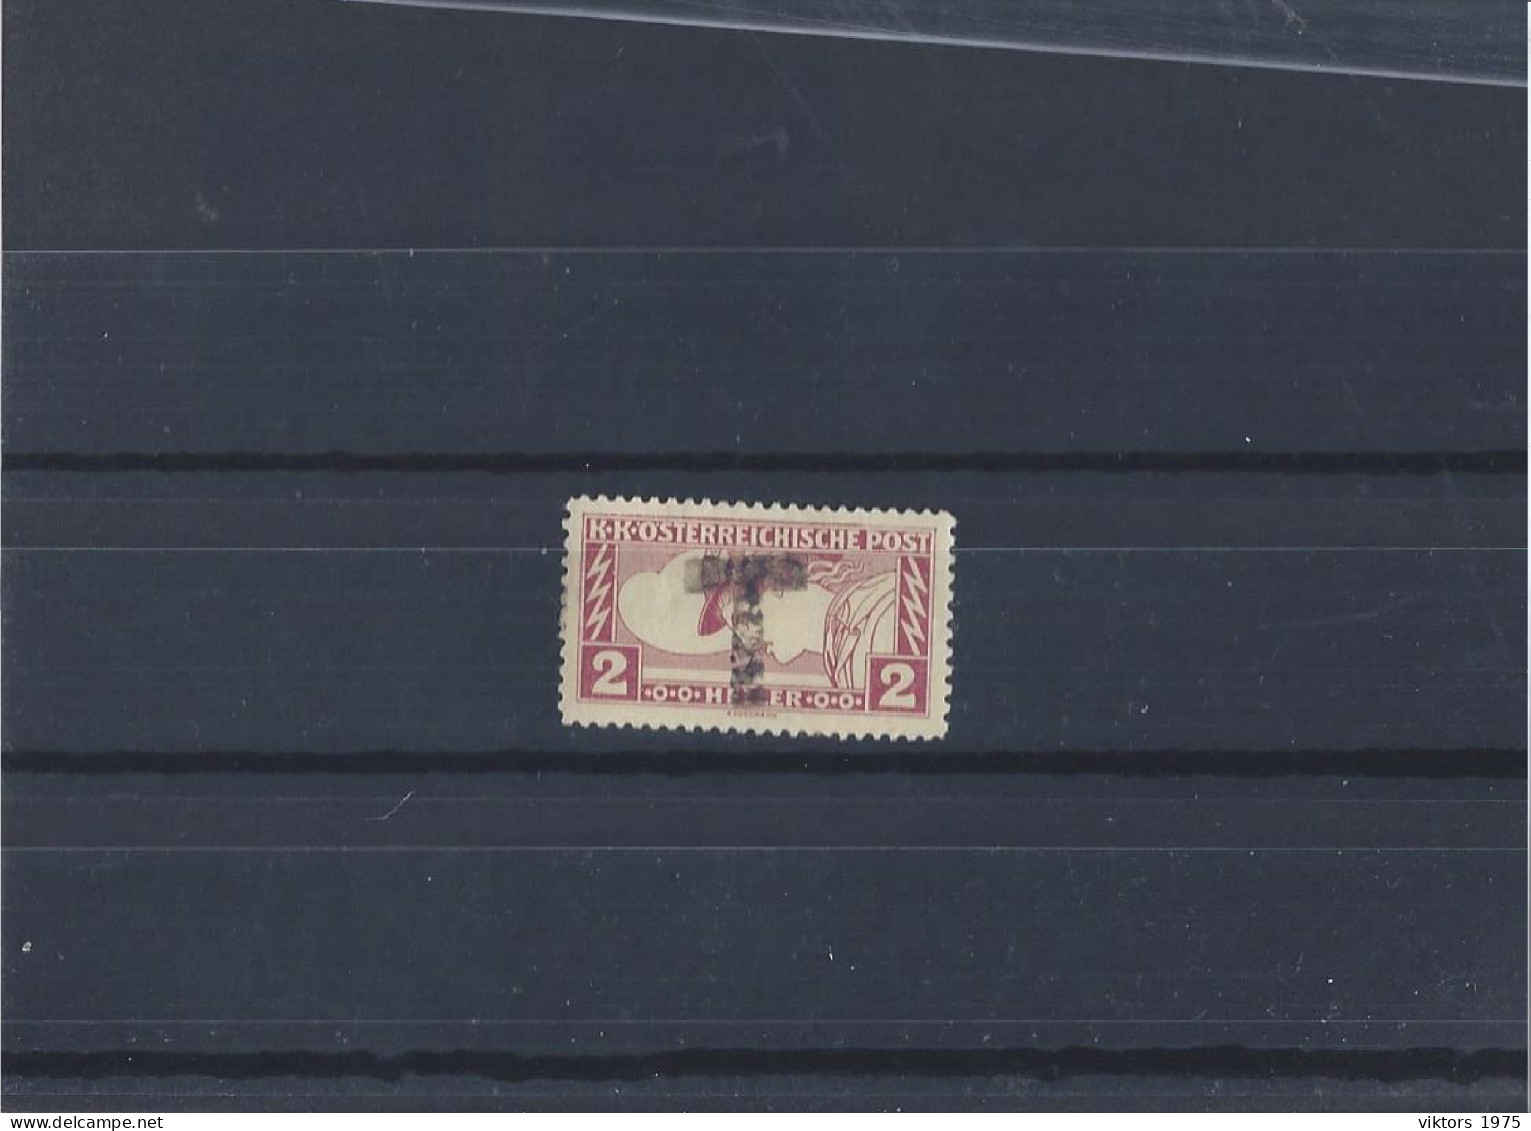 Used Stamp Nr.219 In MICHEL Catalog - Used Stamps